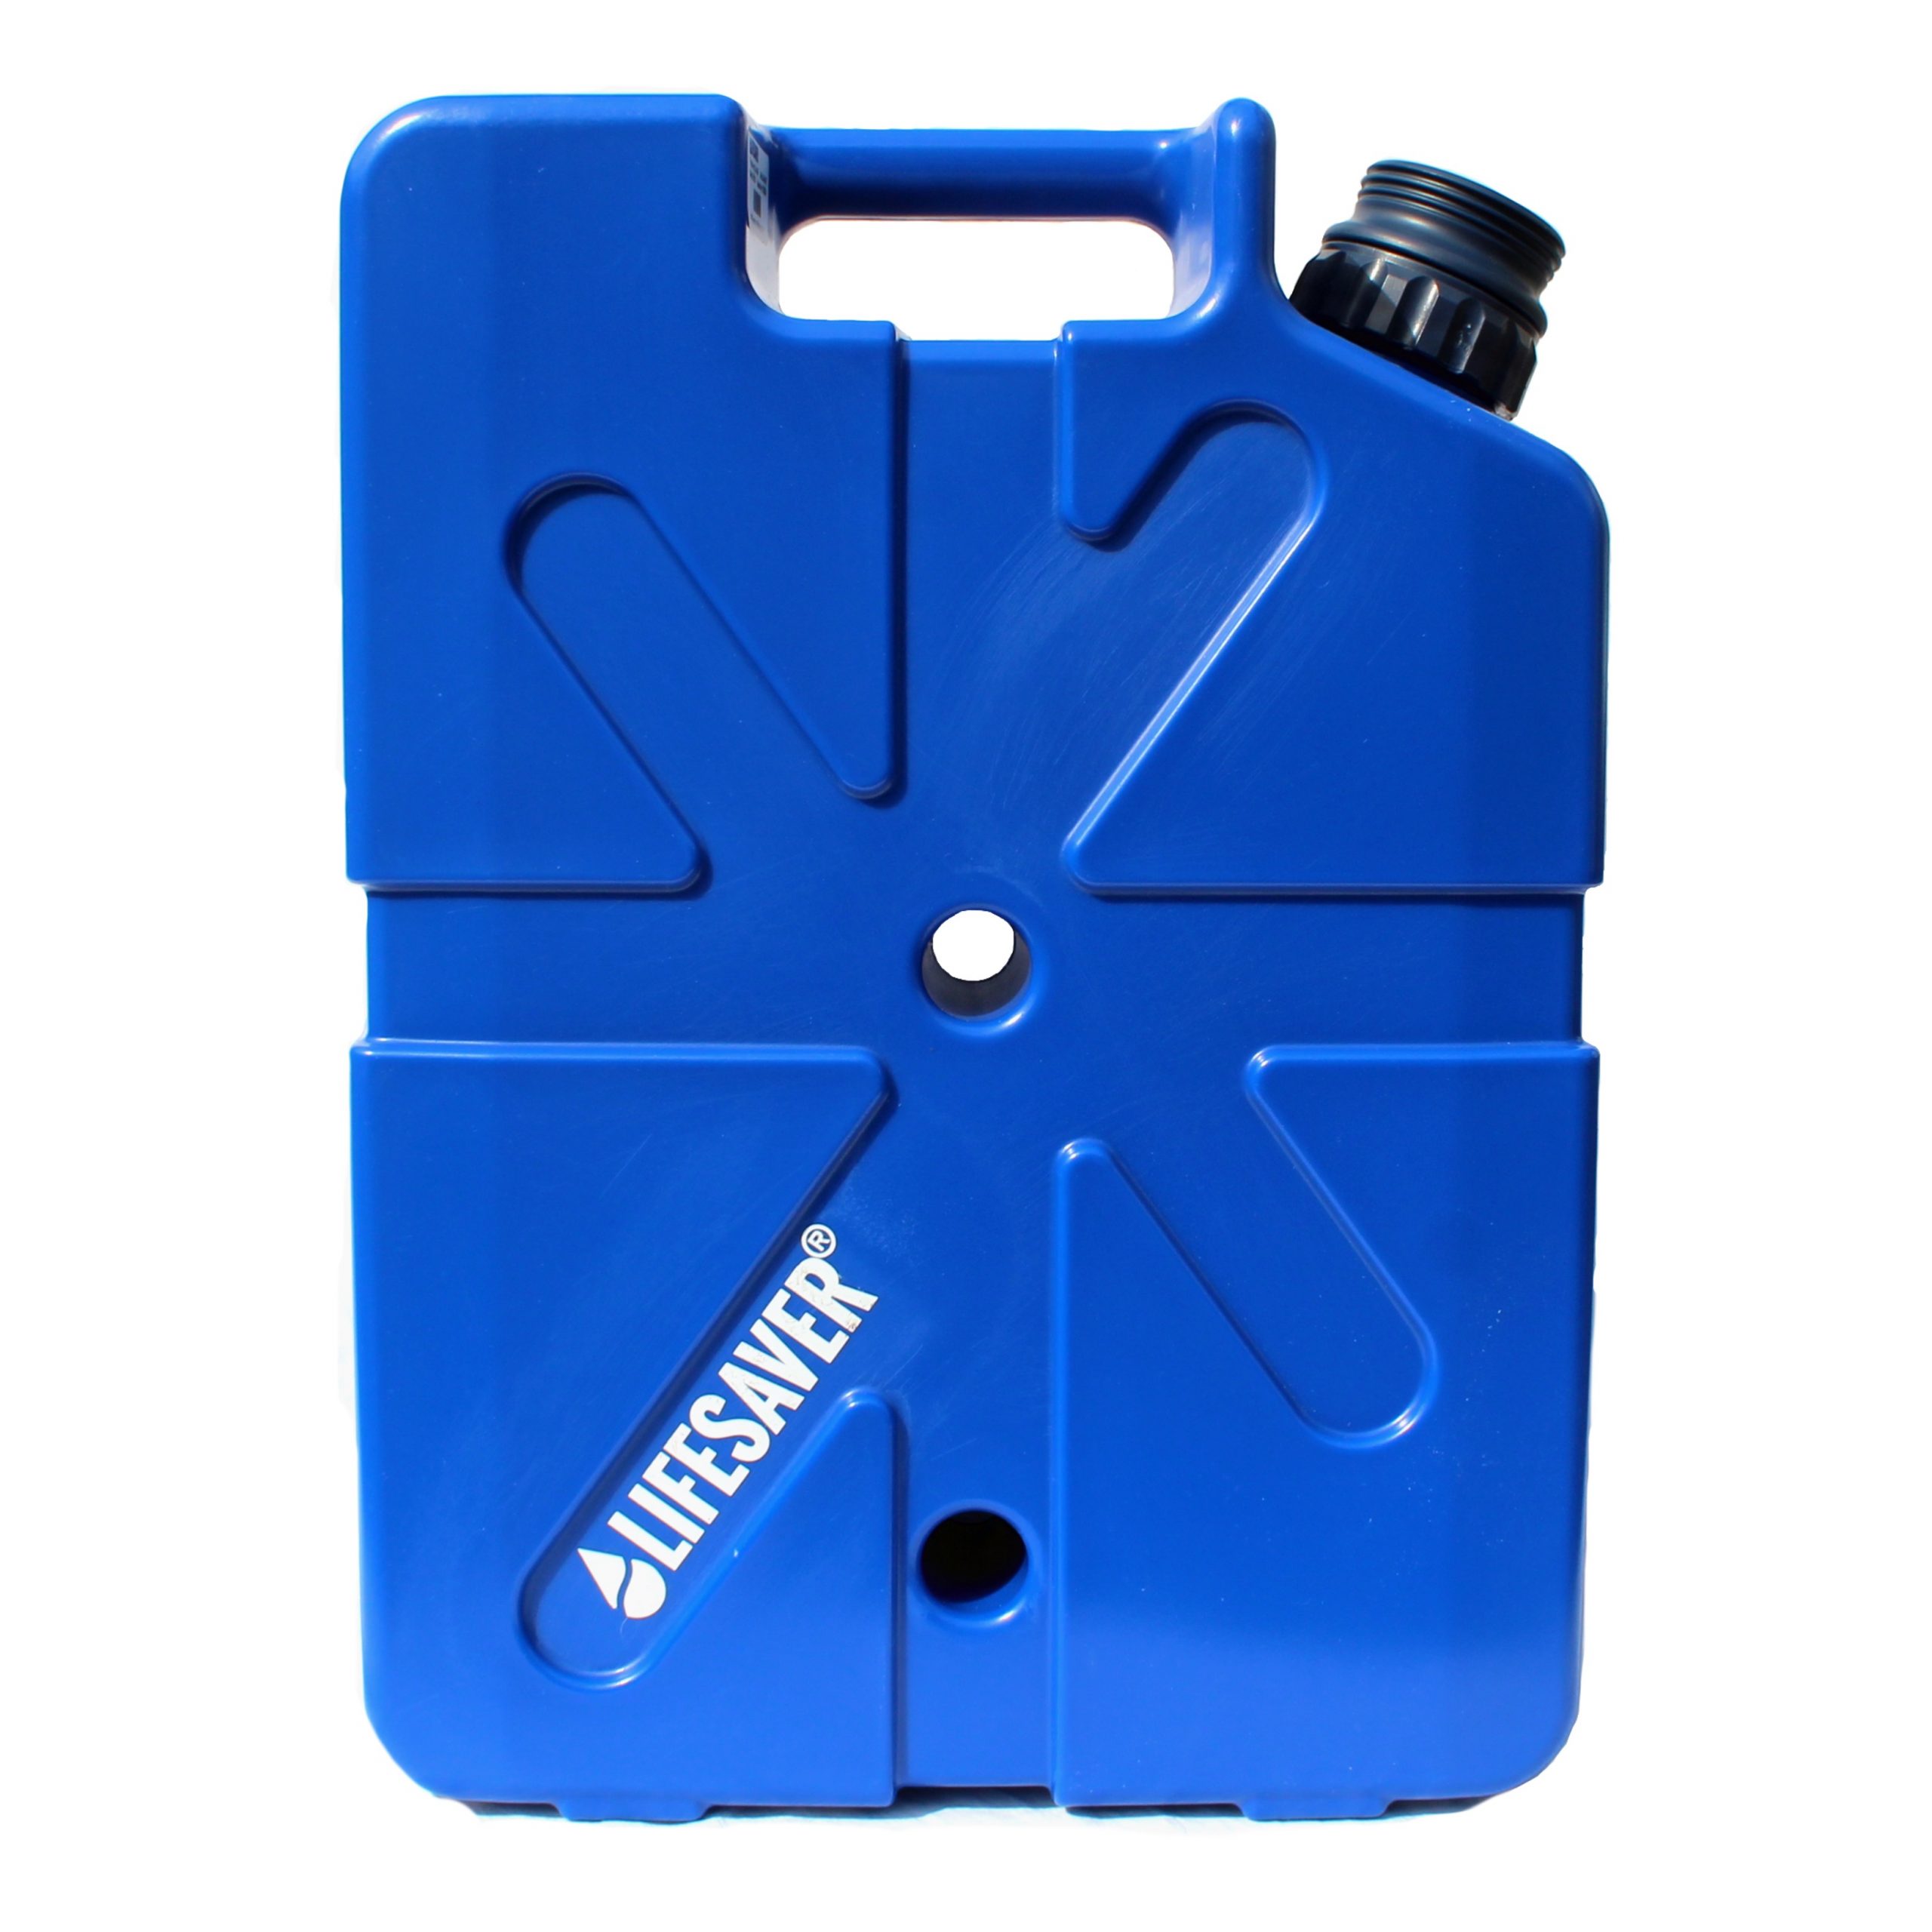 Find out more about LifeSaver Jerrycan 20000UF